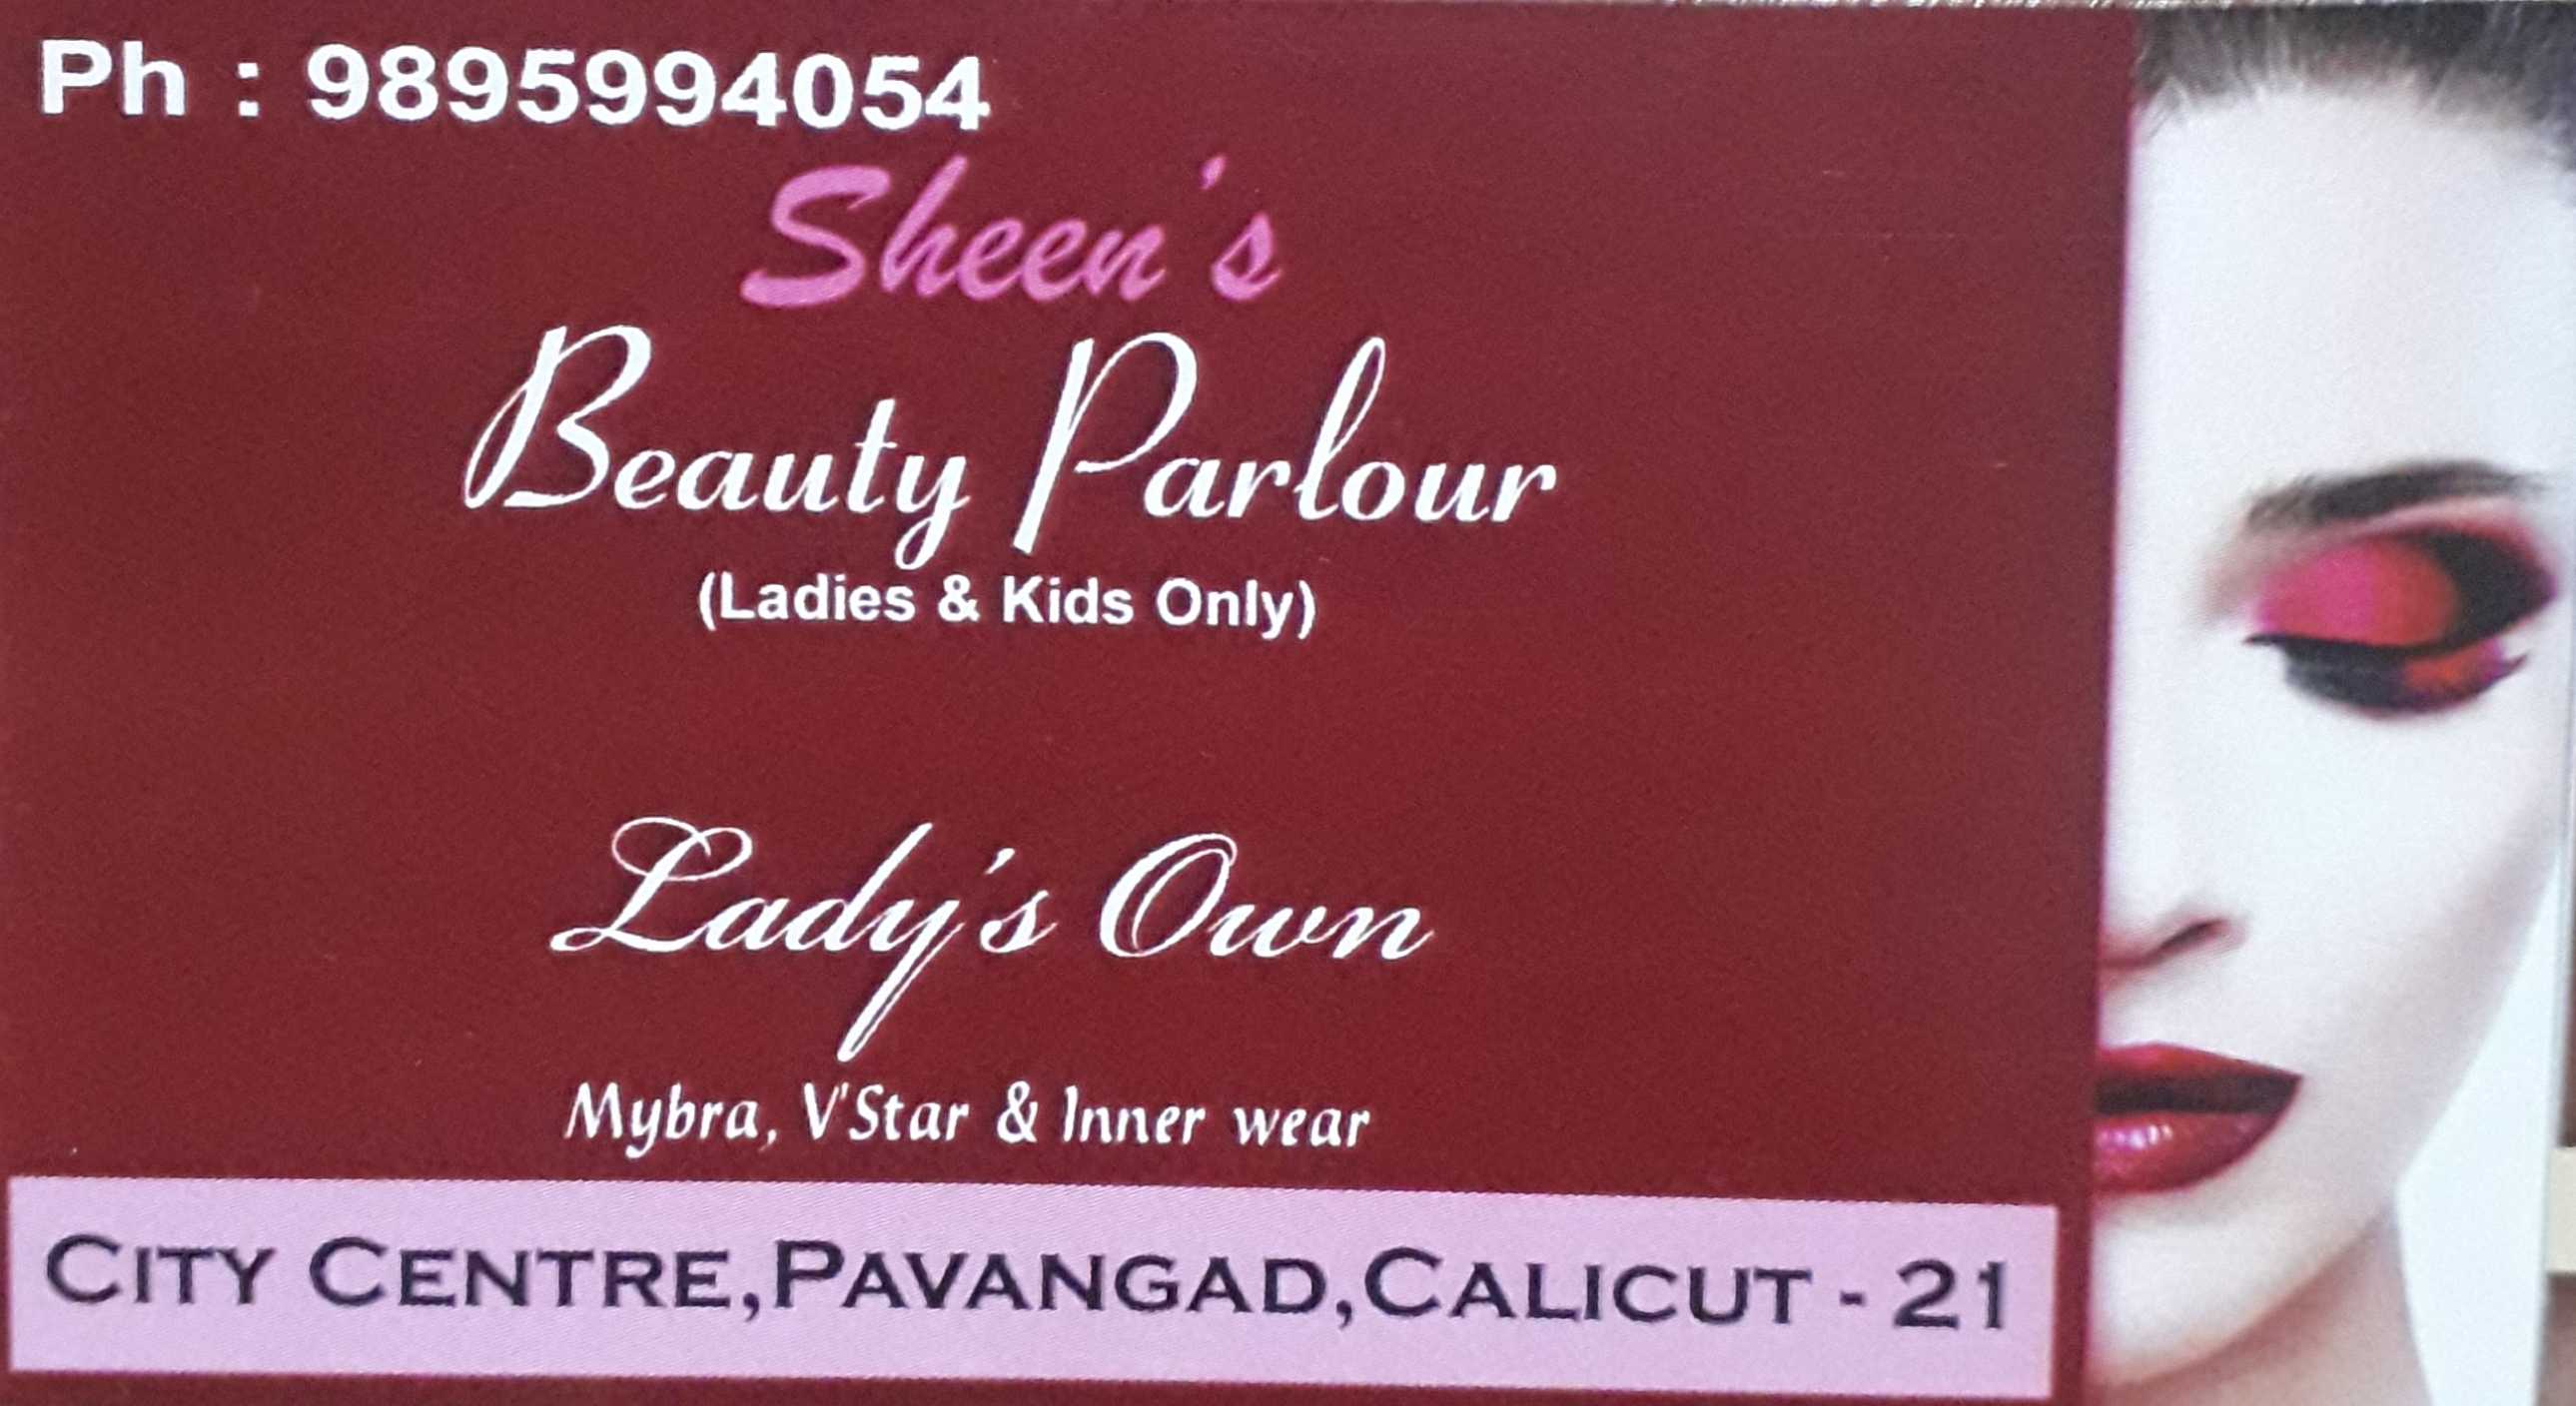 SHEEN'S  LADYS OWN, BEAUTY PARLOUR,  service in Pavangad, Kozhikode